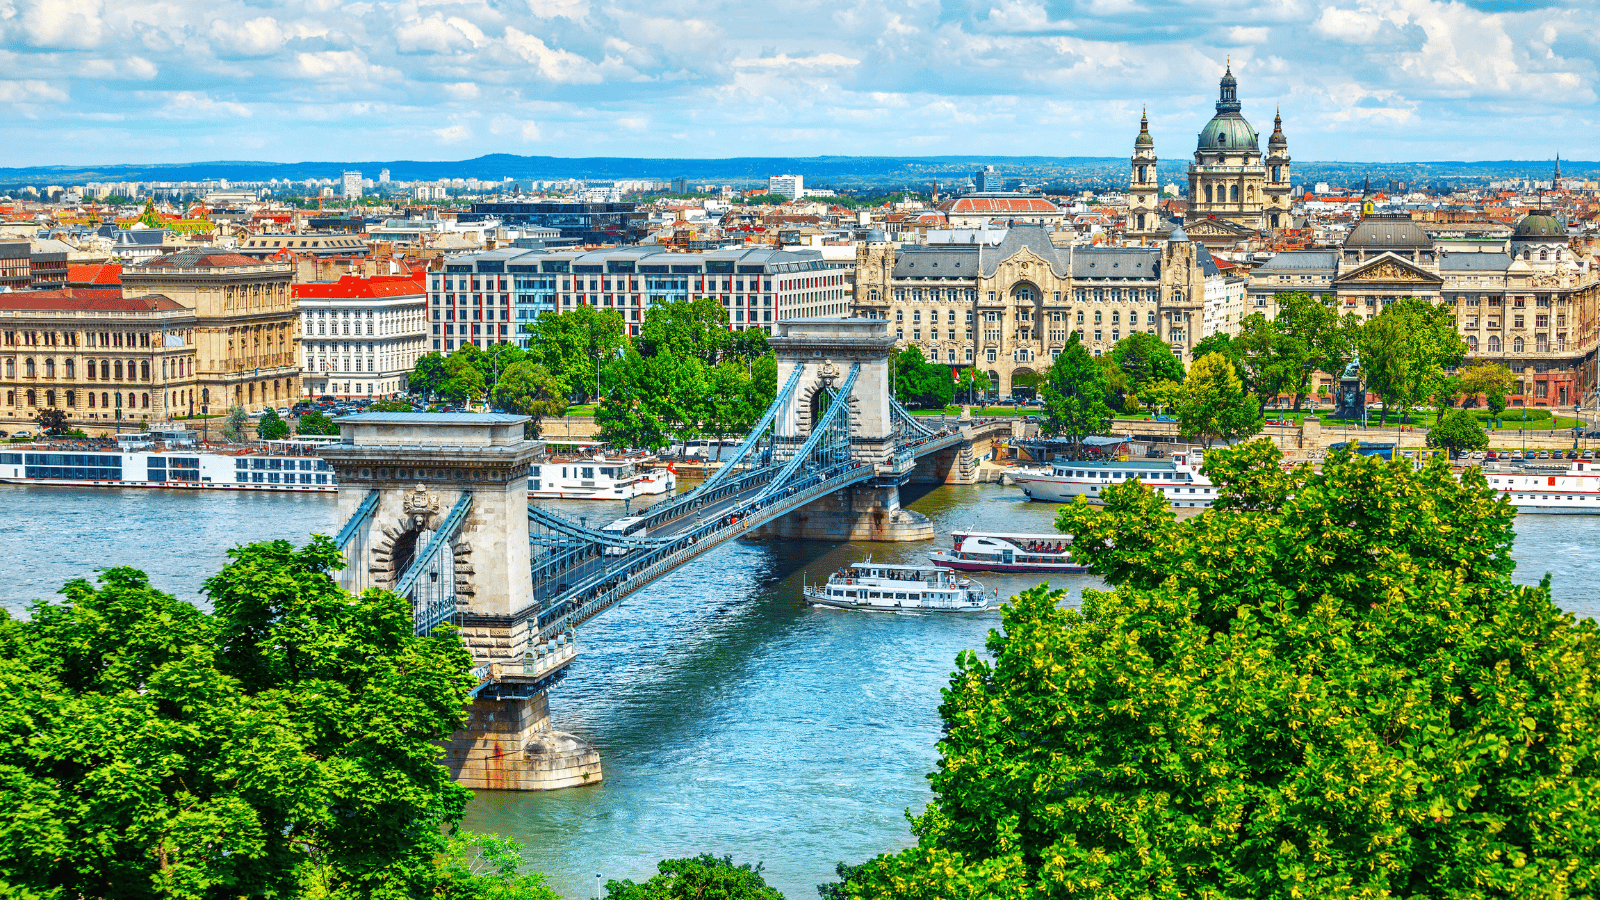 <p>Consider Hungary if you’re craving an end-of-summer trip that won’t break the bank. <a href="https://whatthefab.com/cheap-european-cities.html" rel="follow">Cities like Budapest</a> and Debrecen are budget-friendly throughout the year. You can find extra savings on transportation and lodging by visiting in August. The summer crowds will thin out, offering excellent deals on hotels and car rentals.</p>